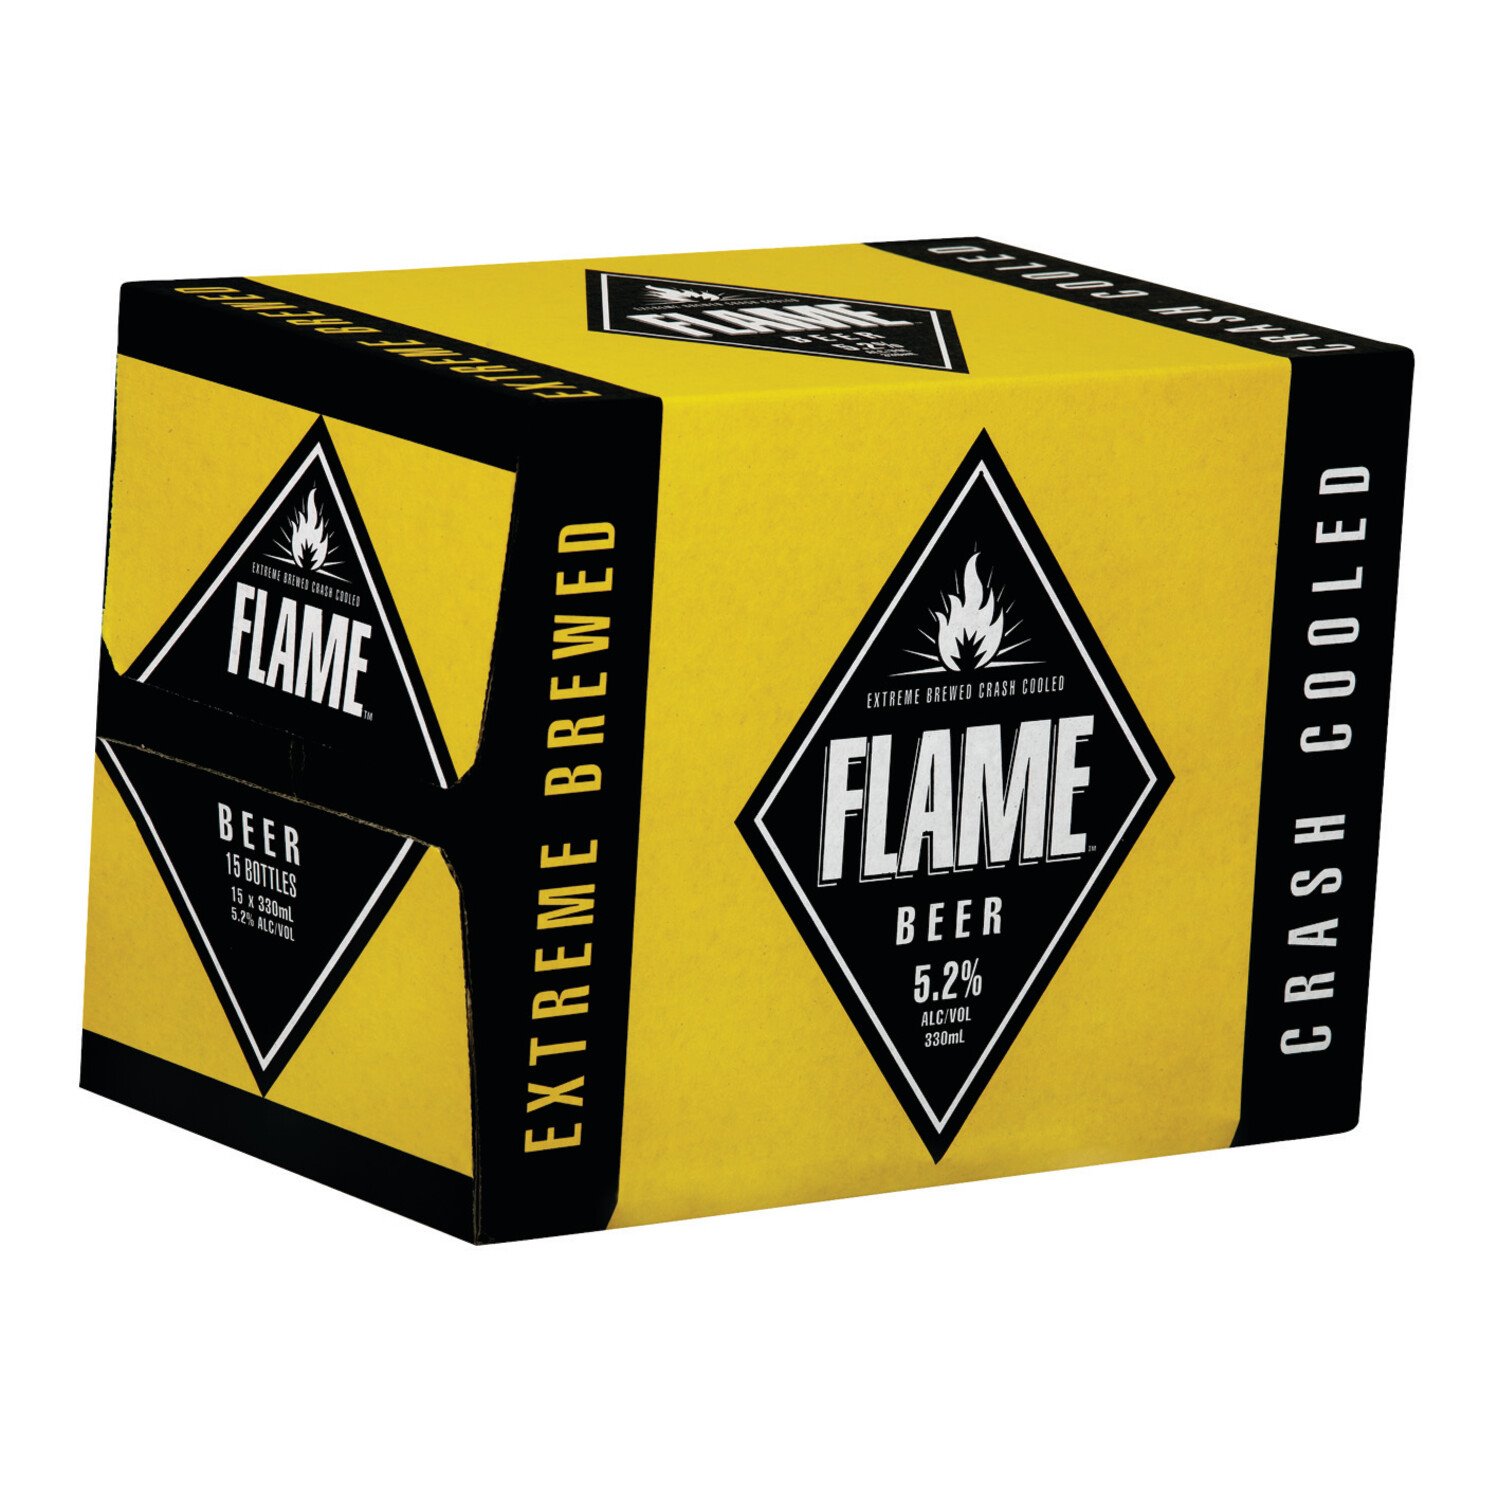 Flame Lager Beer Bottle 15 X 330Ml